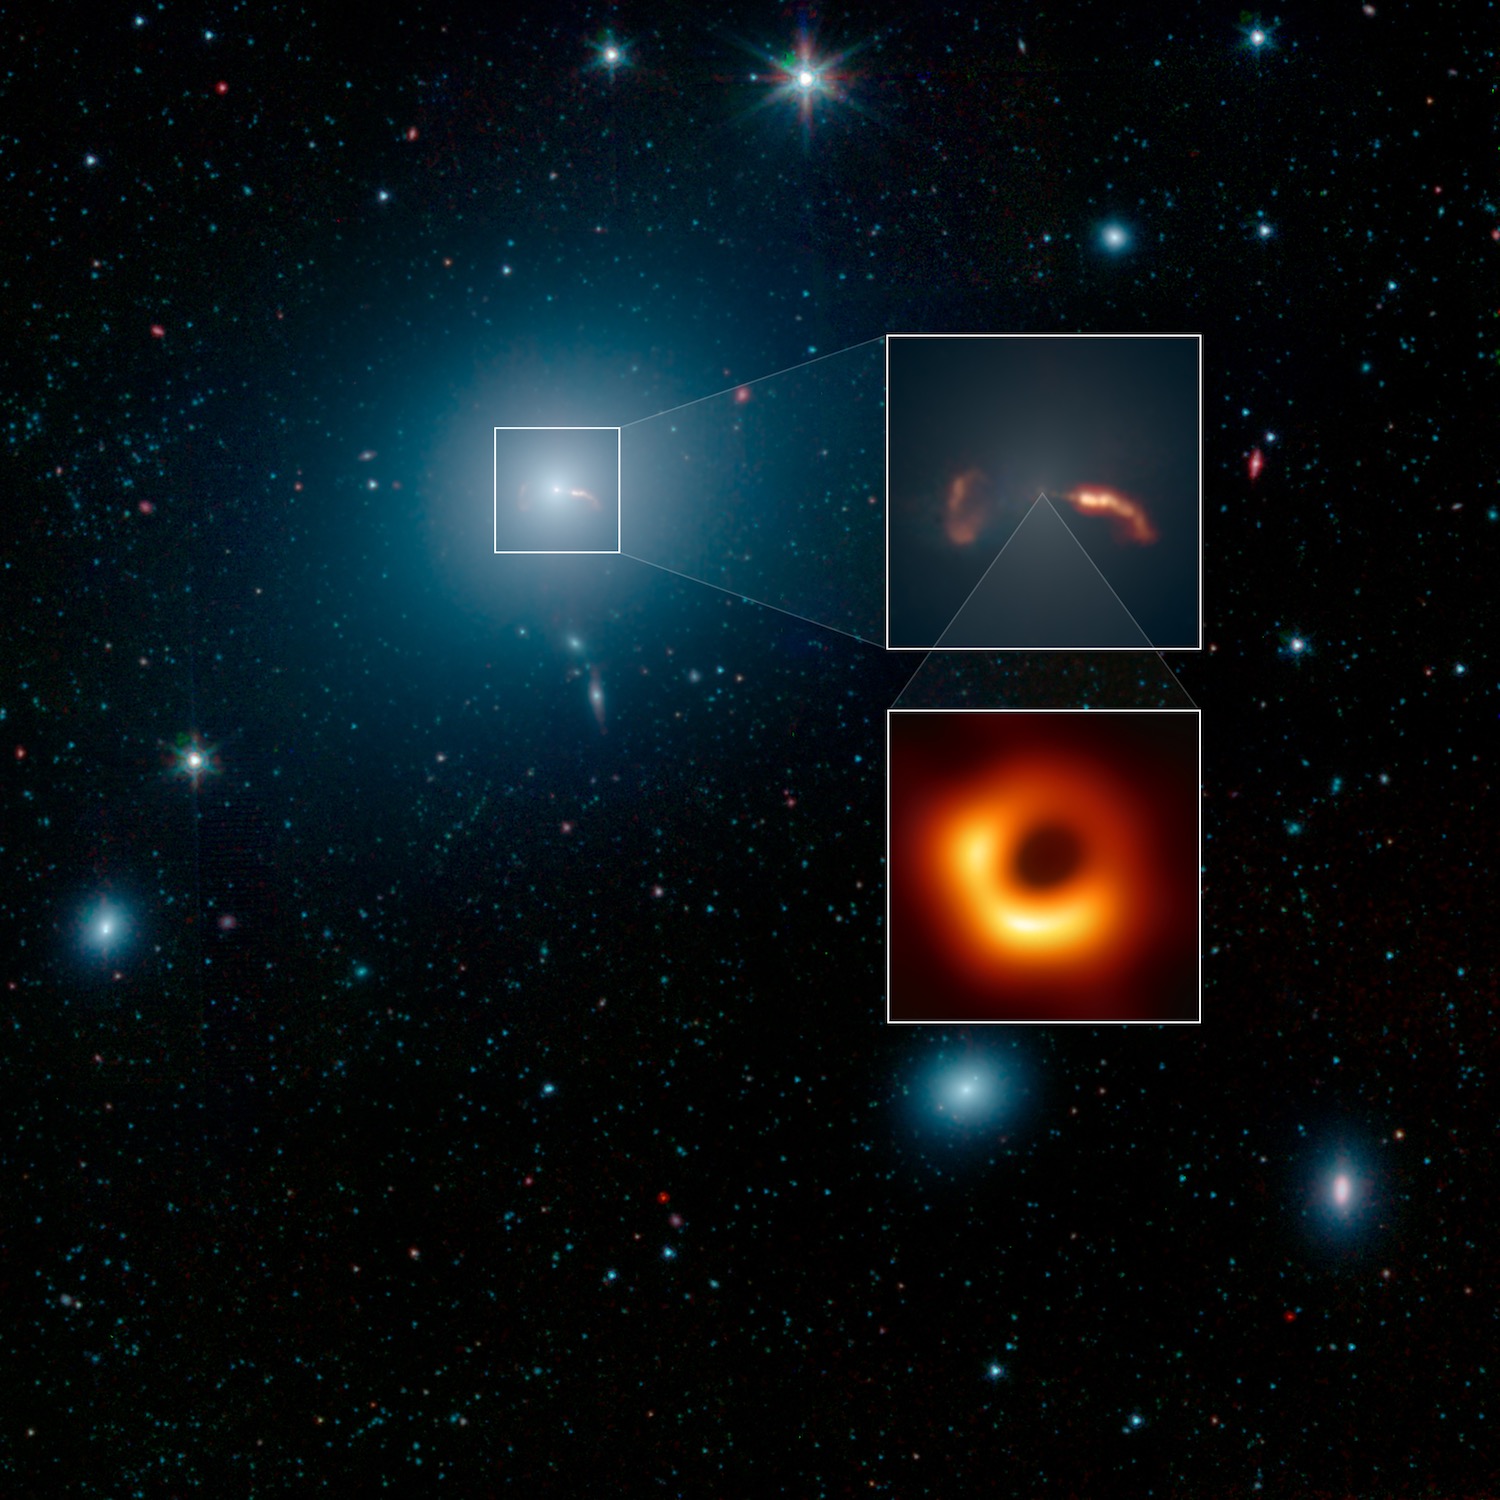 Galaxy Containing First Black Hole Picture Revealed